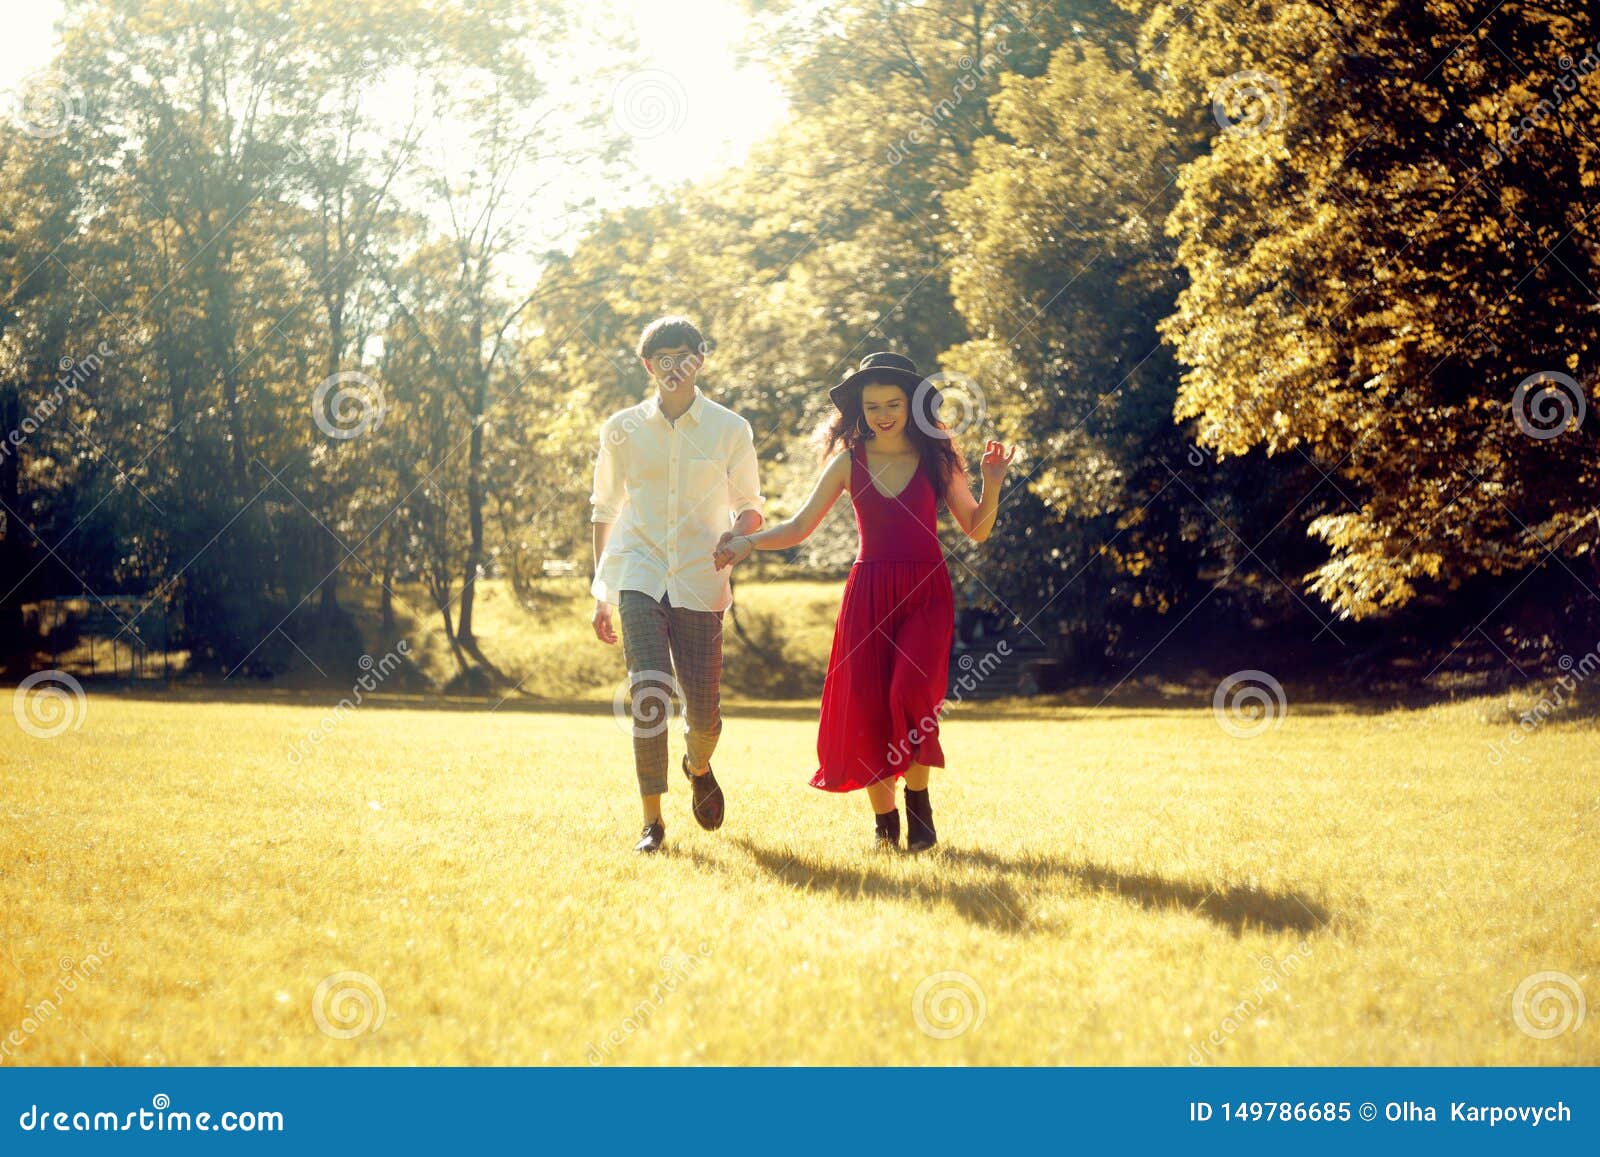 Couple Running In The Forest Field Girl In A Long Red Dress And Hat